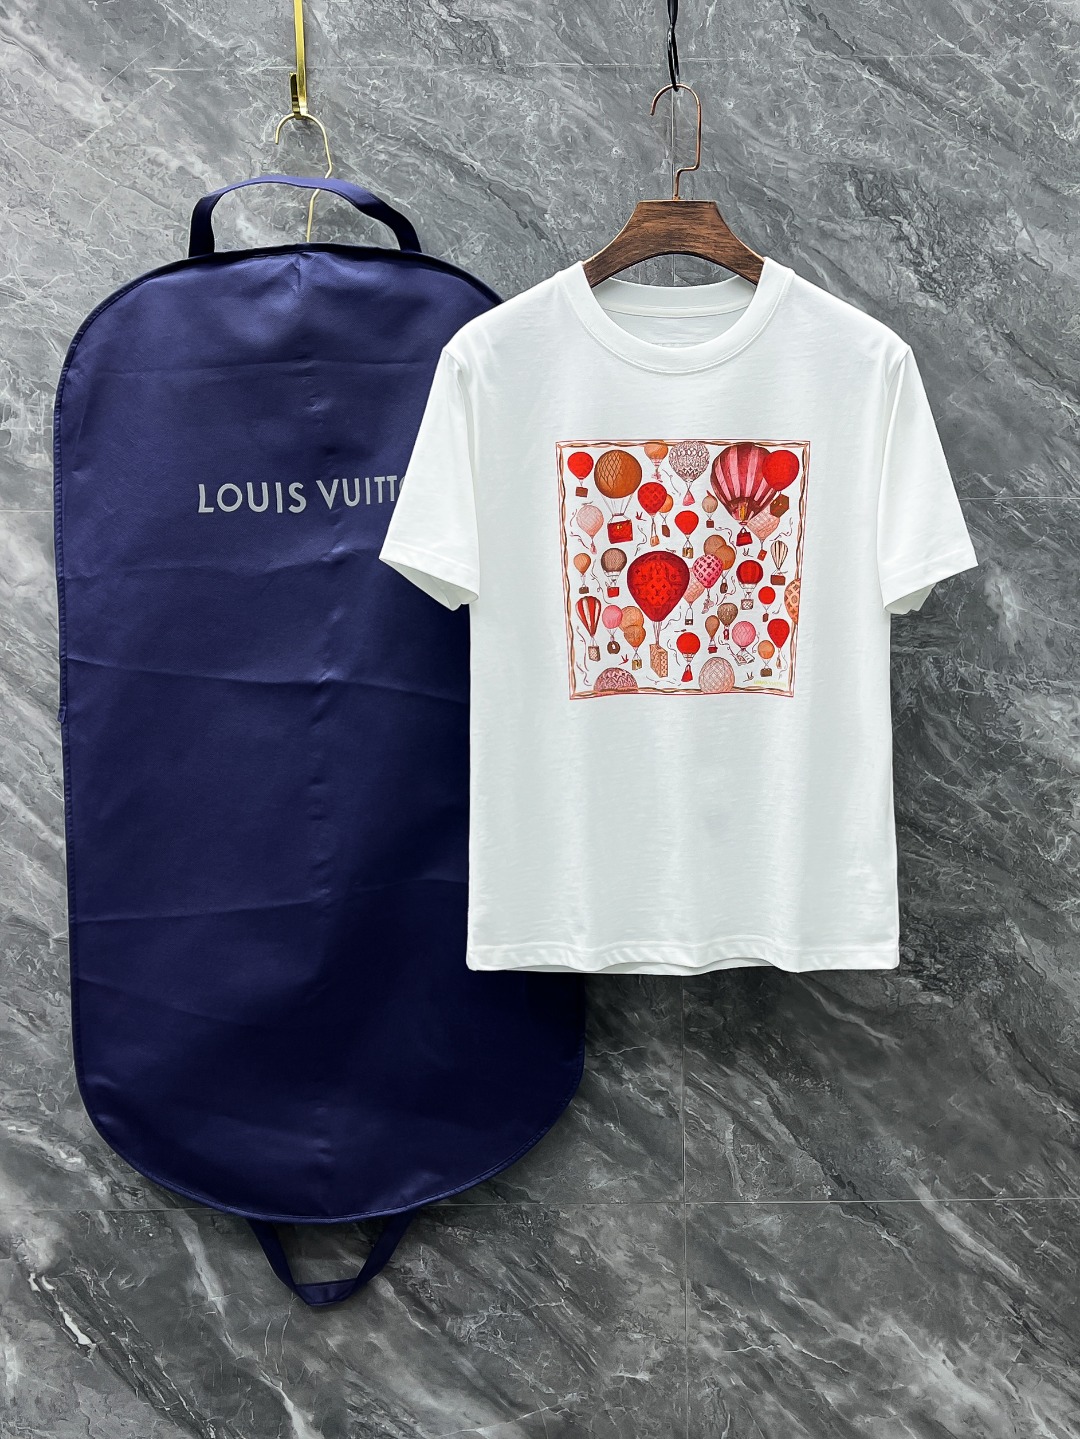 Perfect Quality
 Louis Vuitton Clothing T-Shirt Black White Spring/Summer Collection Fashion Short Sleeve